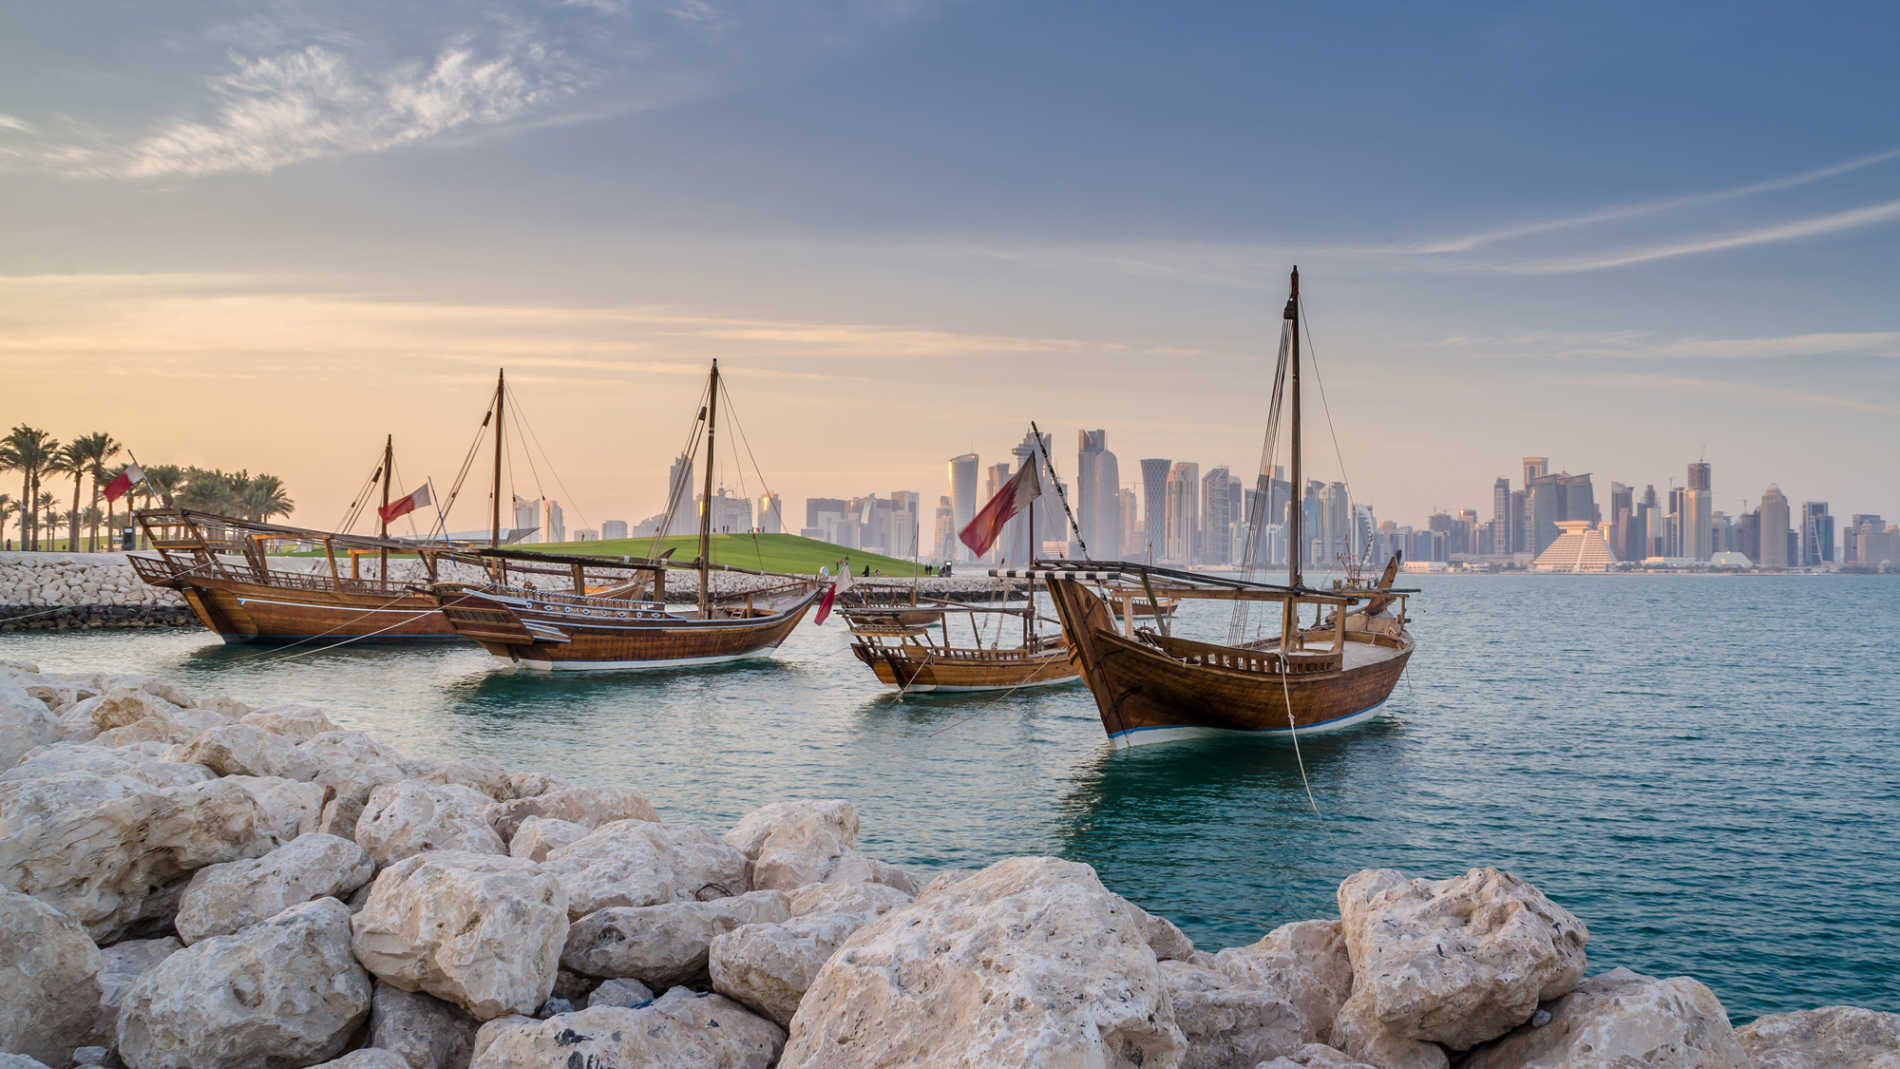 25 Spaces Real Estate - Doha Dhow skyline